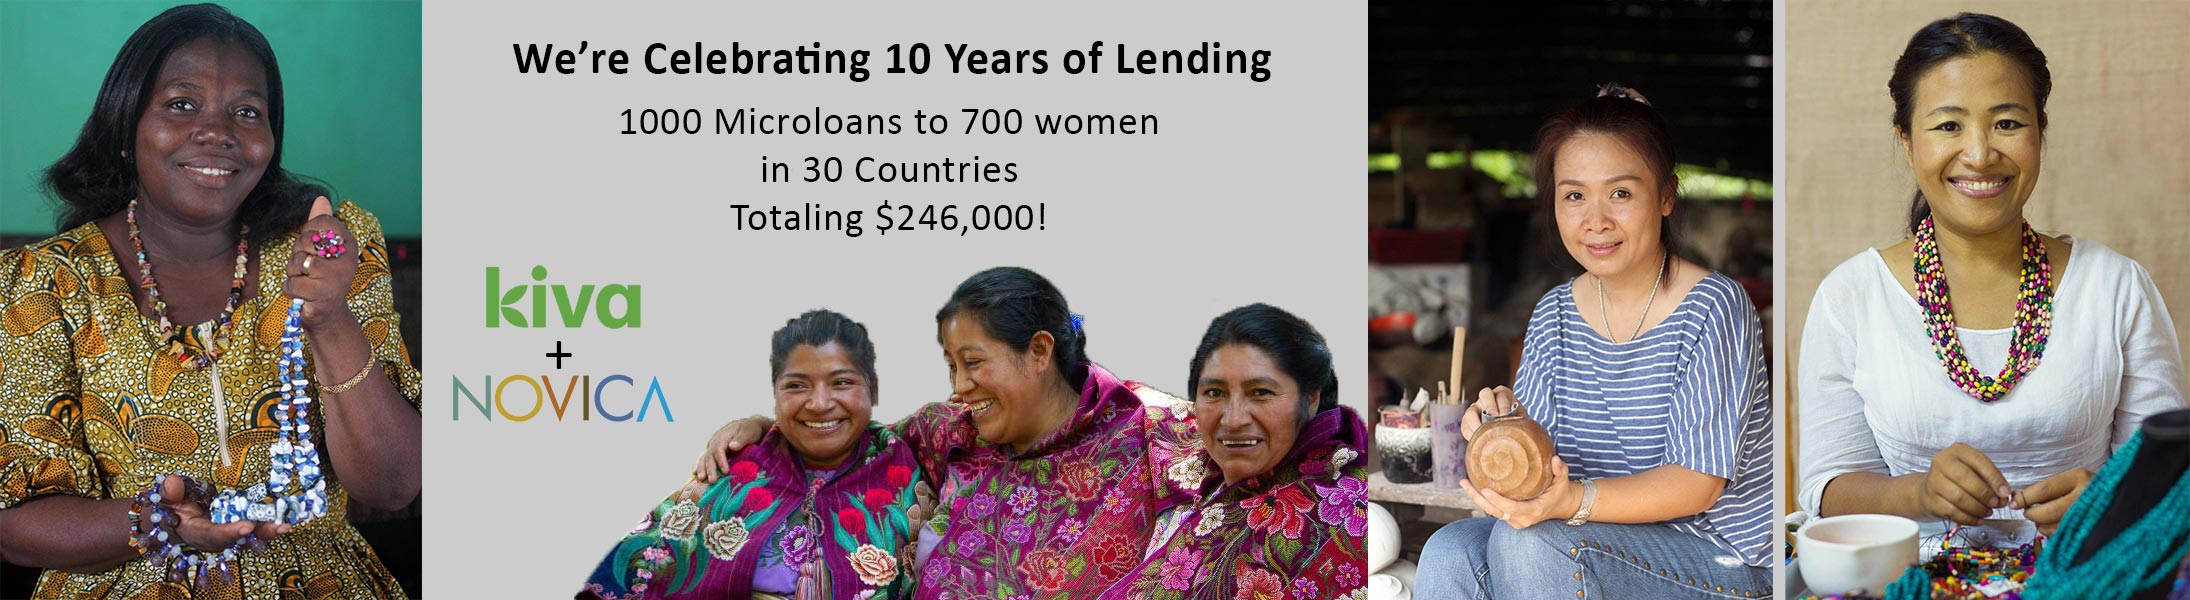 Celebrating 10 Years of Microloans, Women with Crafts